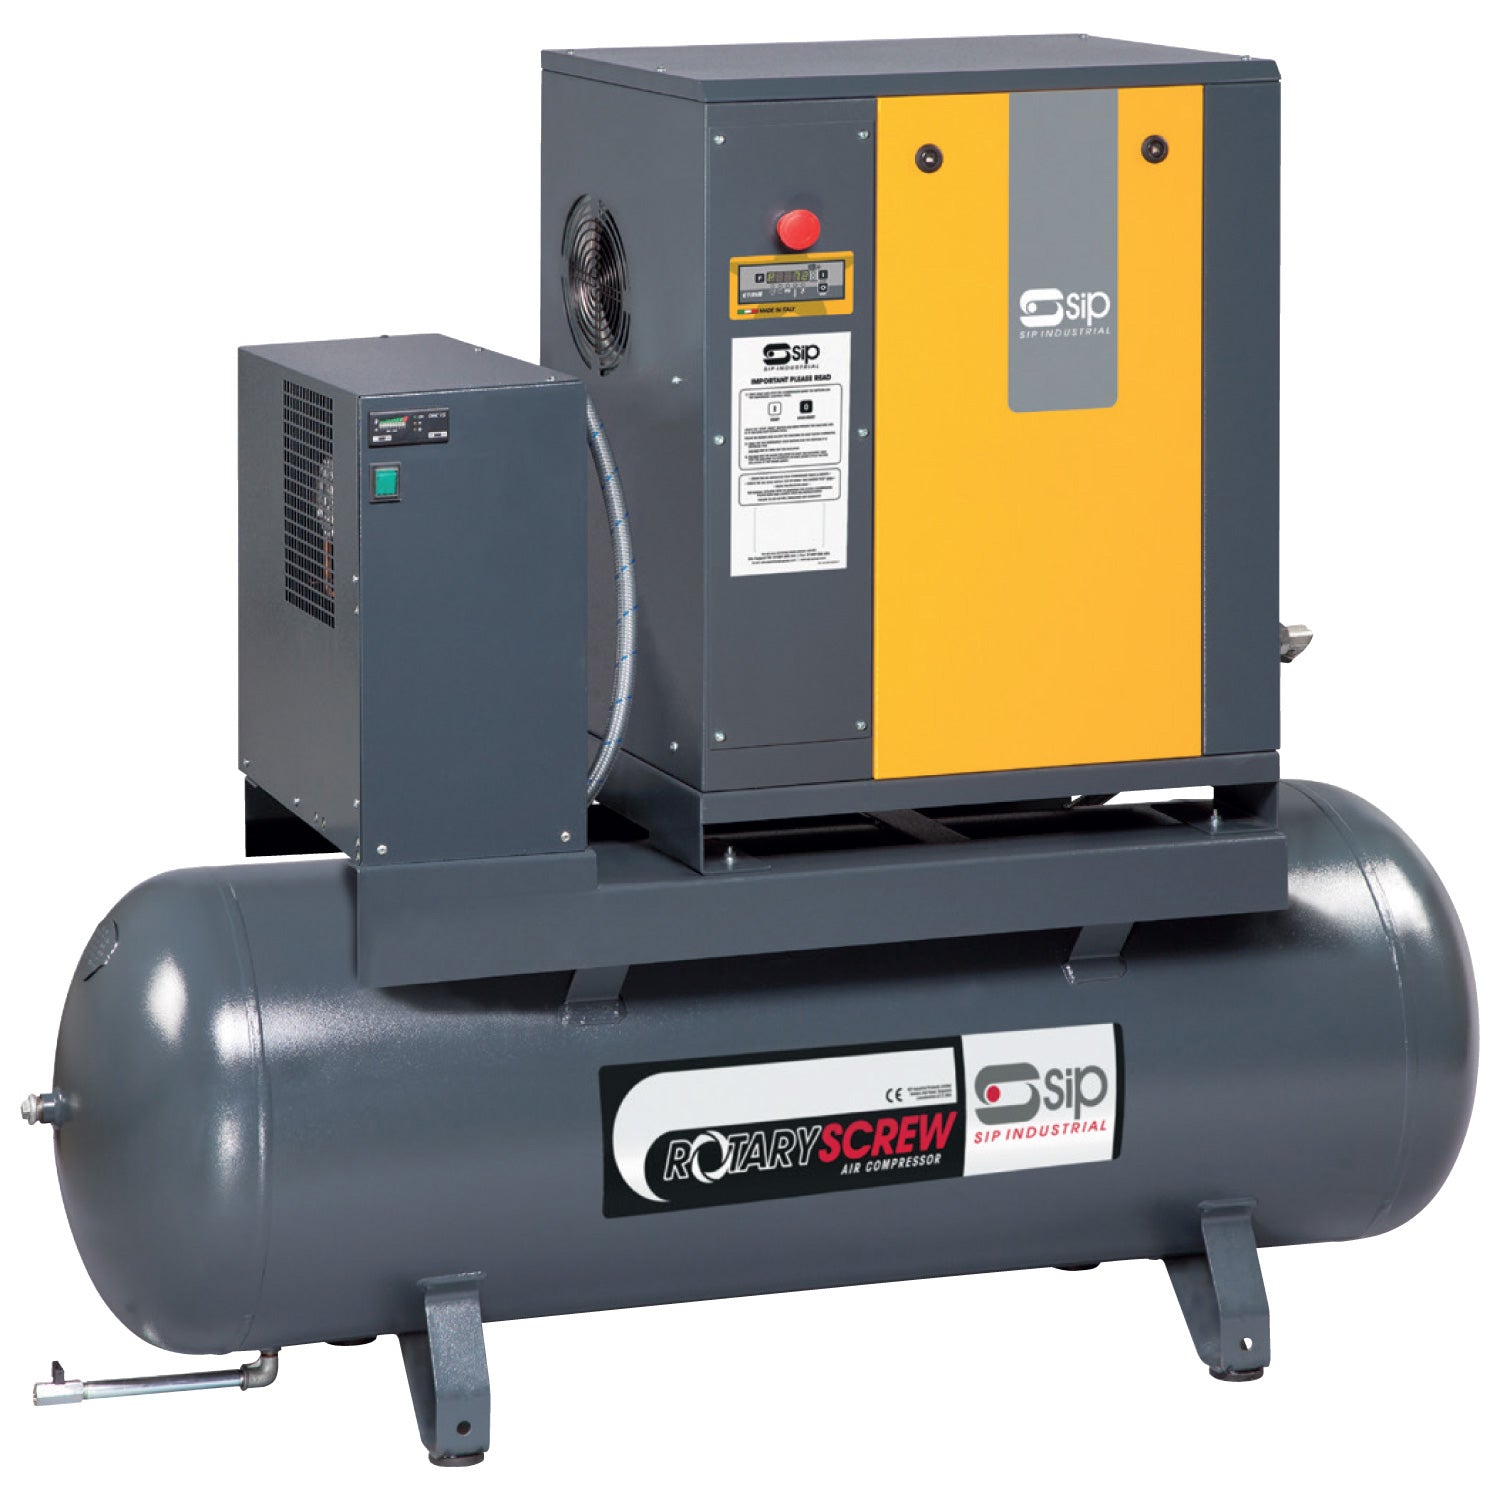 SIP RS4.0-10-200BD/RD 200ltr Rotary Screw Compressor with Dryer, Sip Industrial